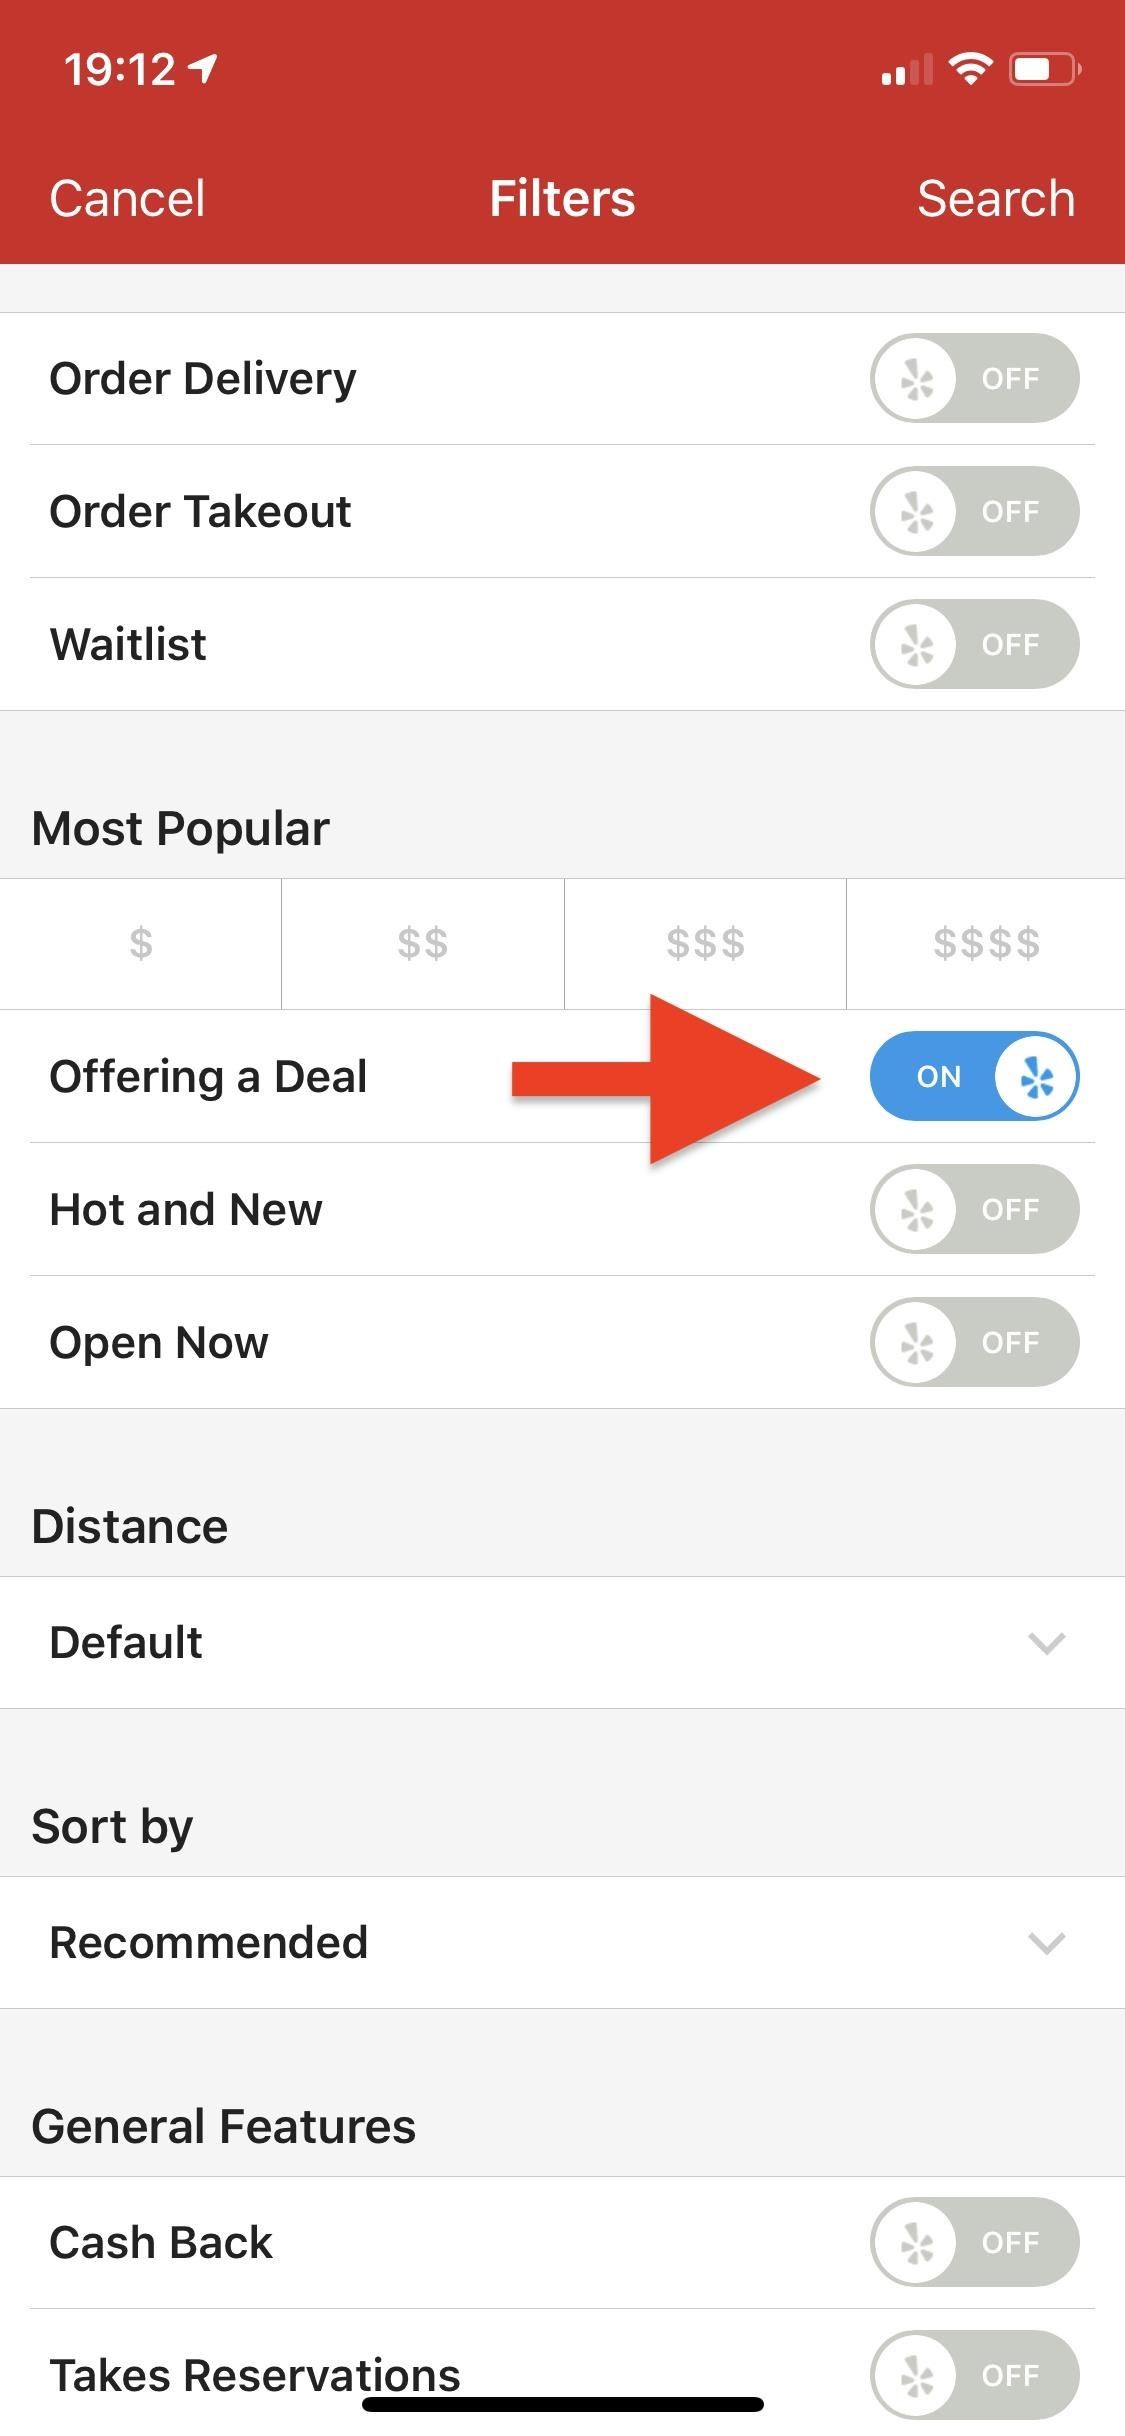 How to Find & Use Yelp Deals on Your Phone to Save Money When Dining Out, Shopping & More